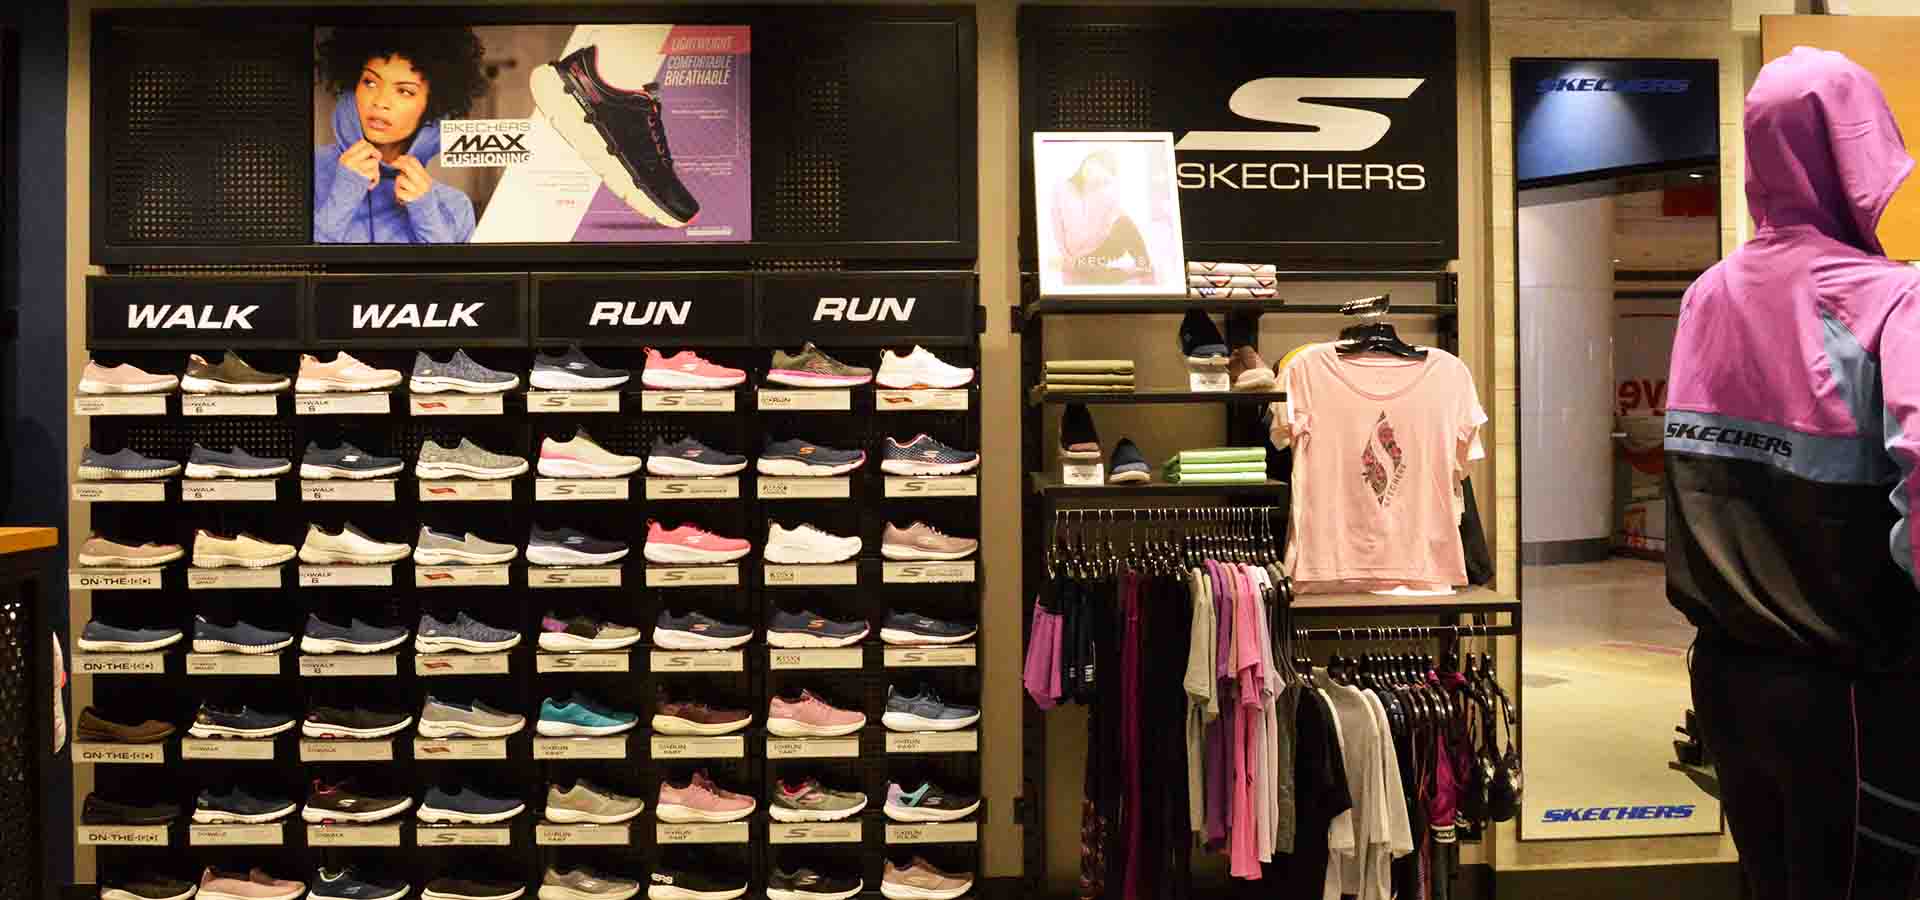 Skechers store photos in mall